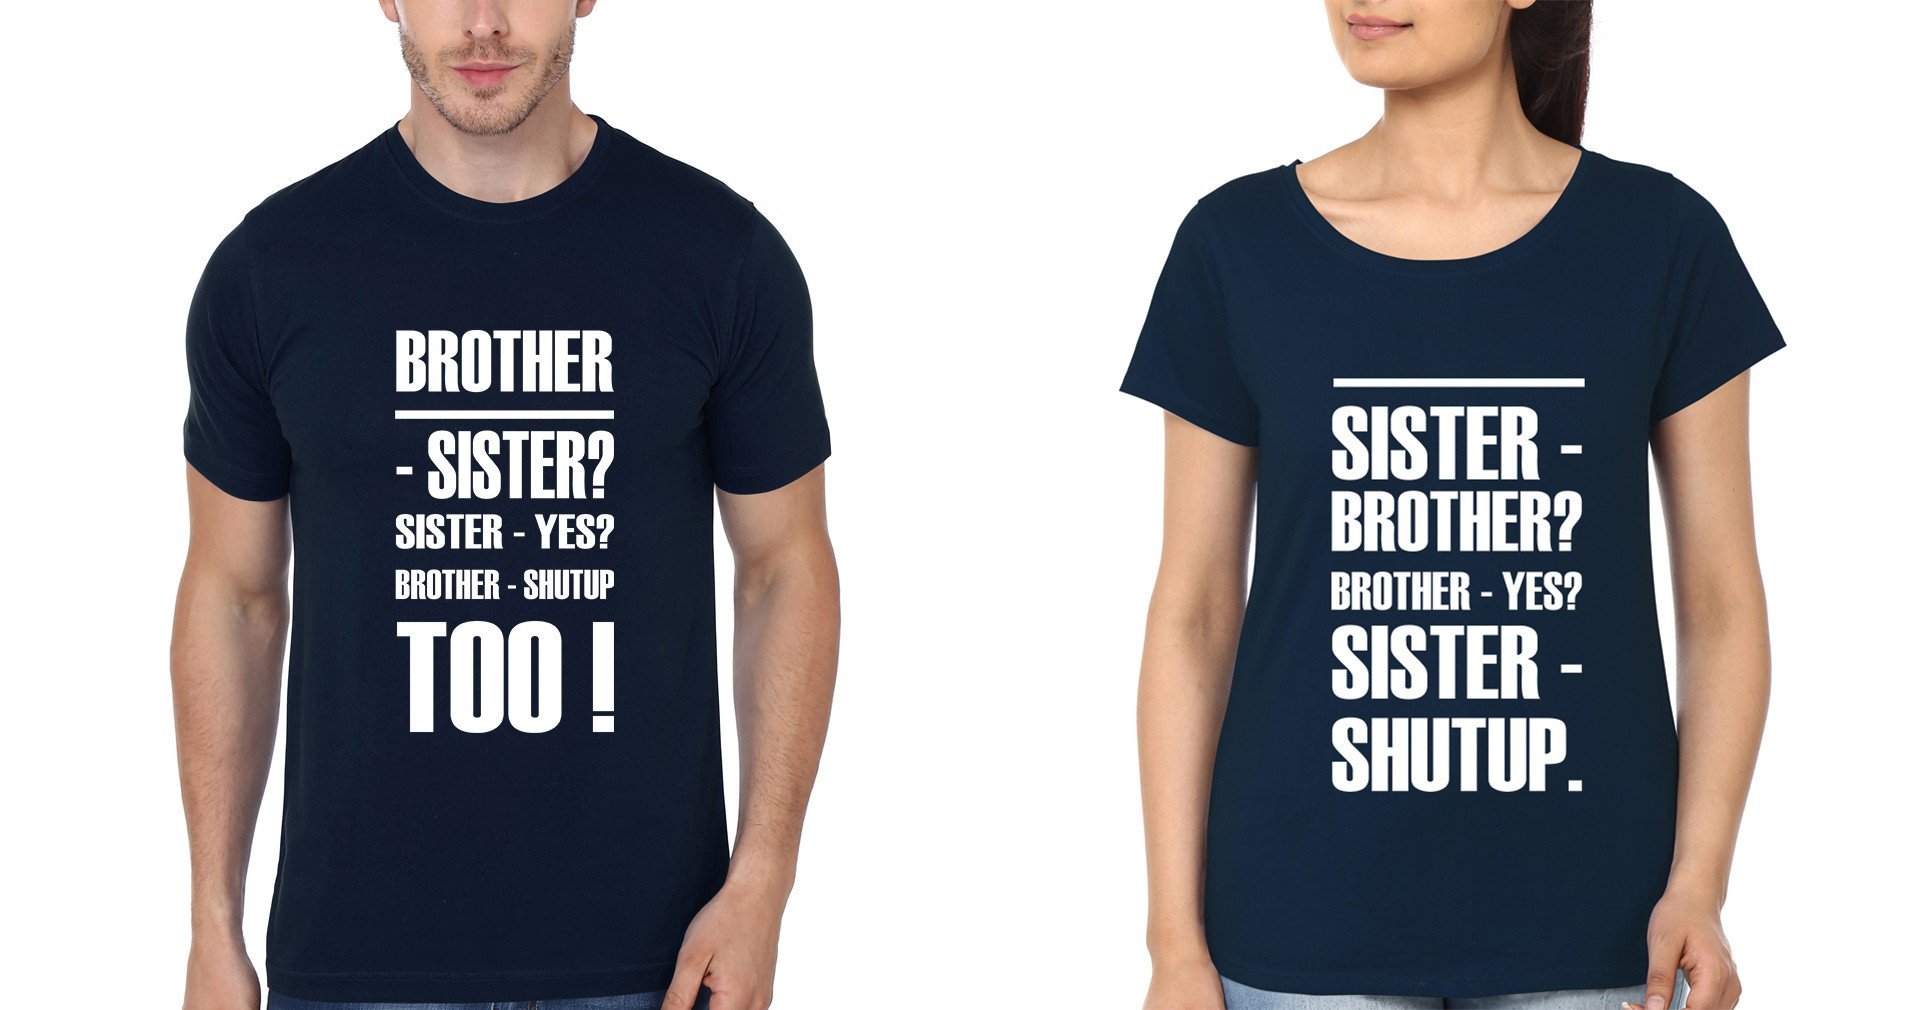 FunkyTradition Shut Up Brother Sister Navy Blue Half Sleeves T Shirt - FunkyTradition